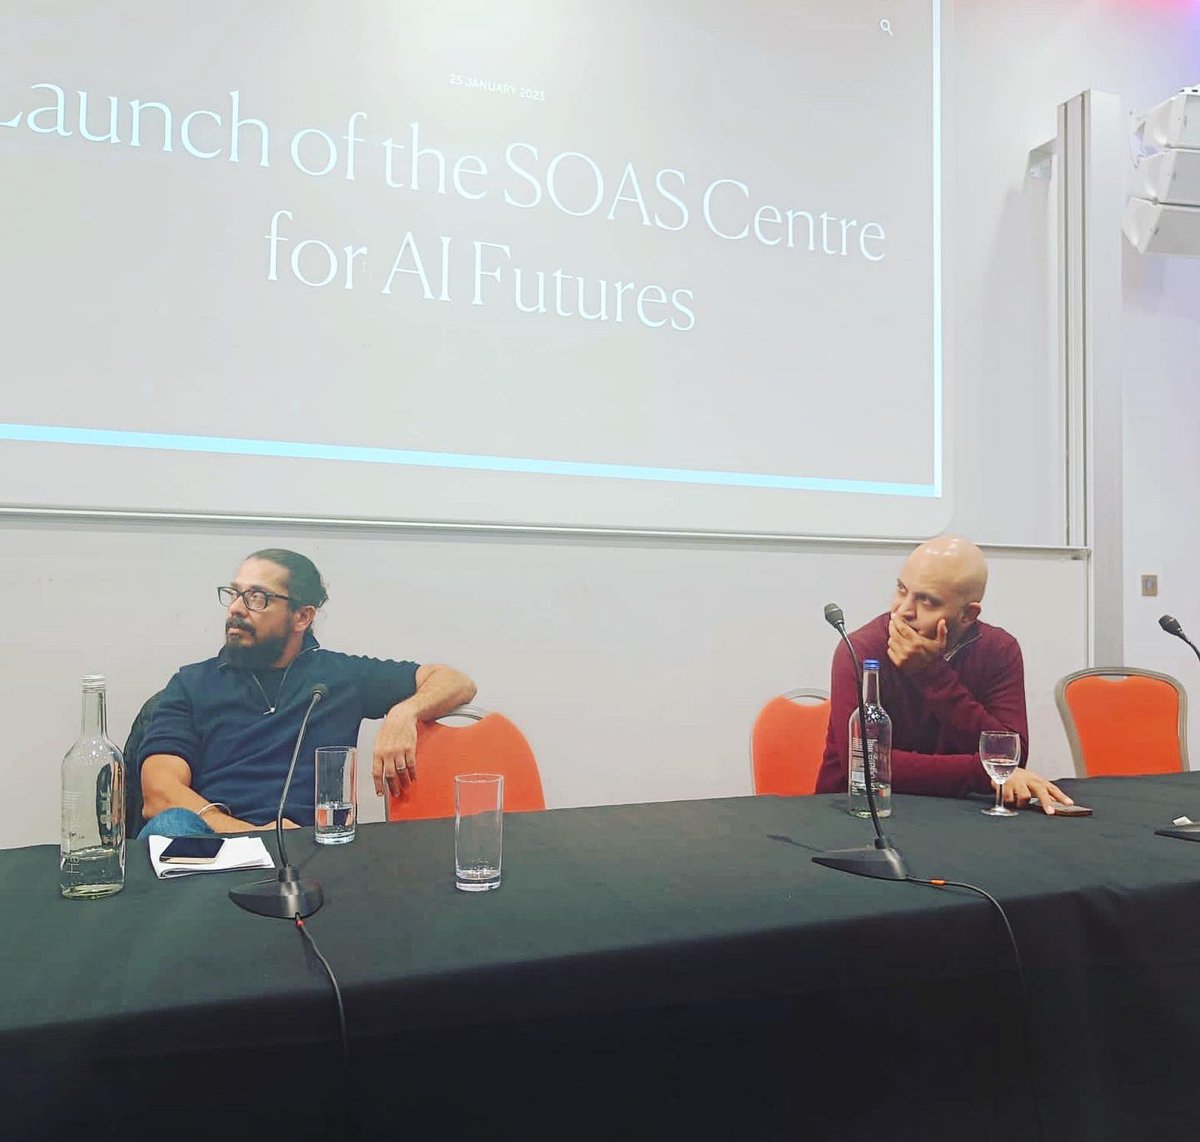 We are live! Thank you to @SOAS @HelsinkiHSSH @AdHabb @lhammondsoas @objetpetitm and @sombatabyal for working on constructing the SOAS centre for AI futures with @QuiltAi_ - @anuragkbanerjee and I are excited by the possibilities and potential collaborations as the centre forms!